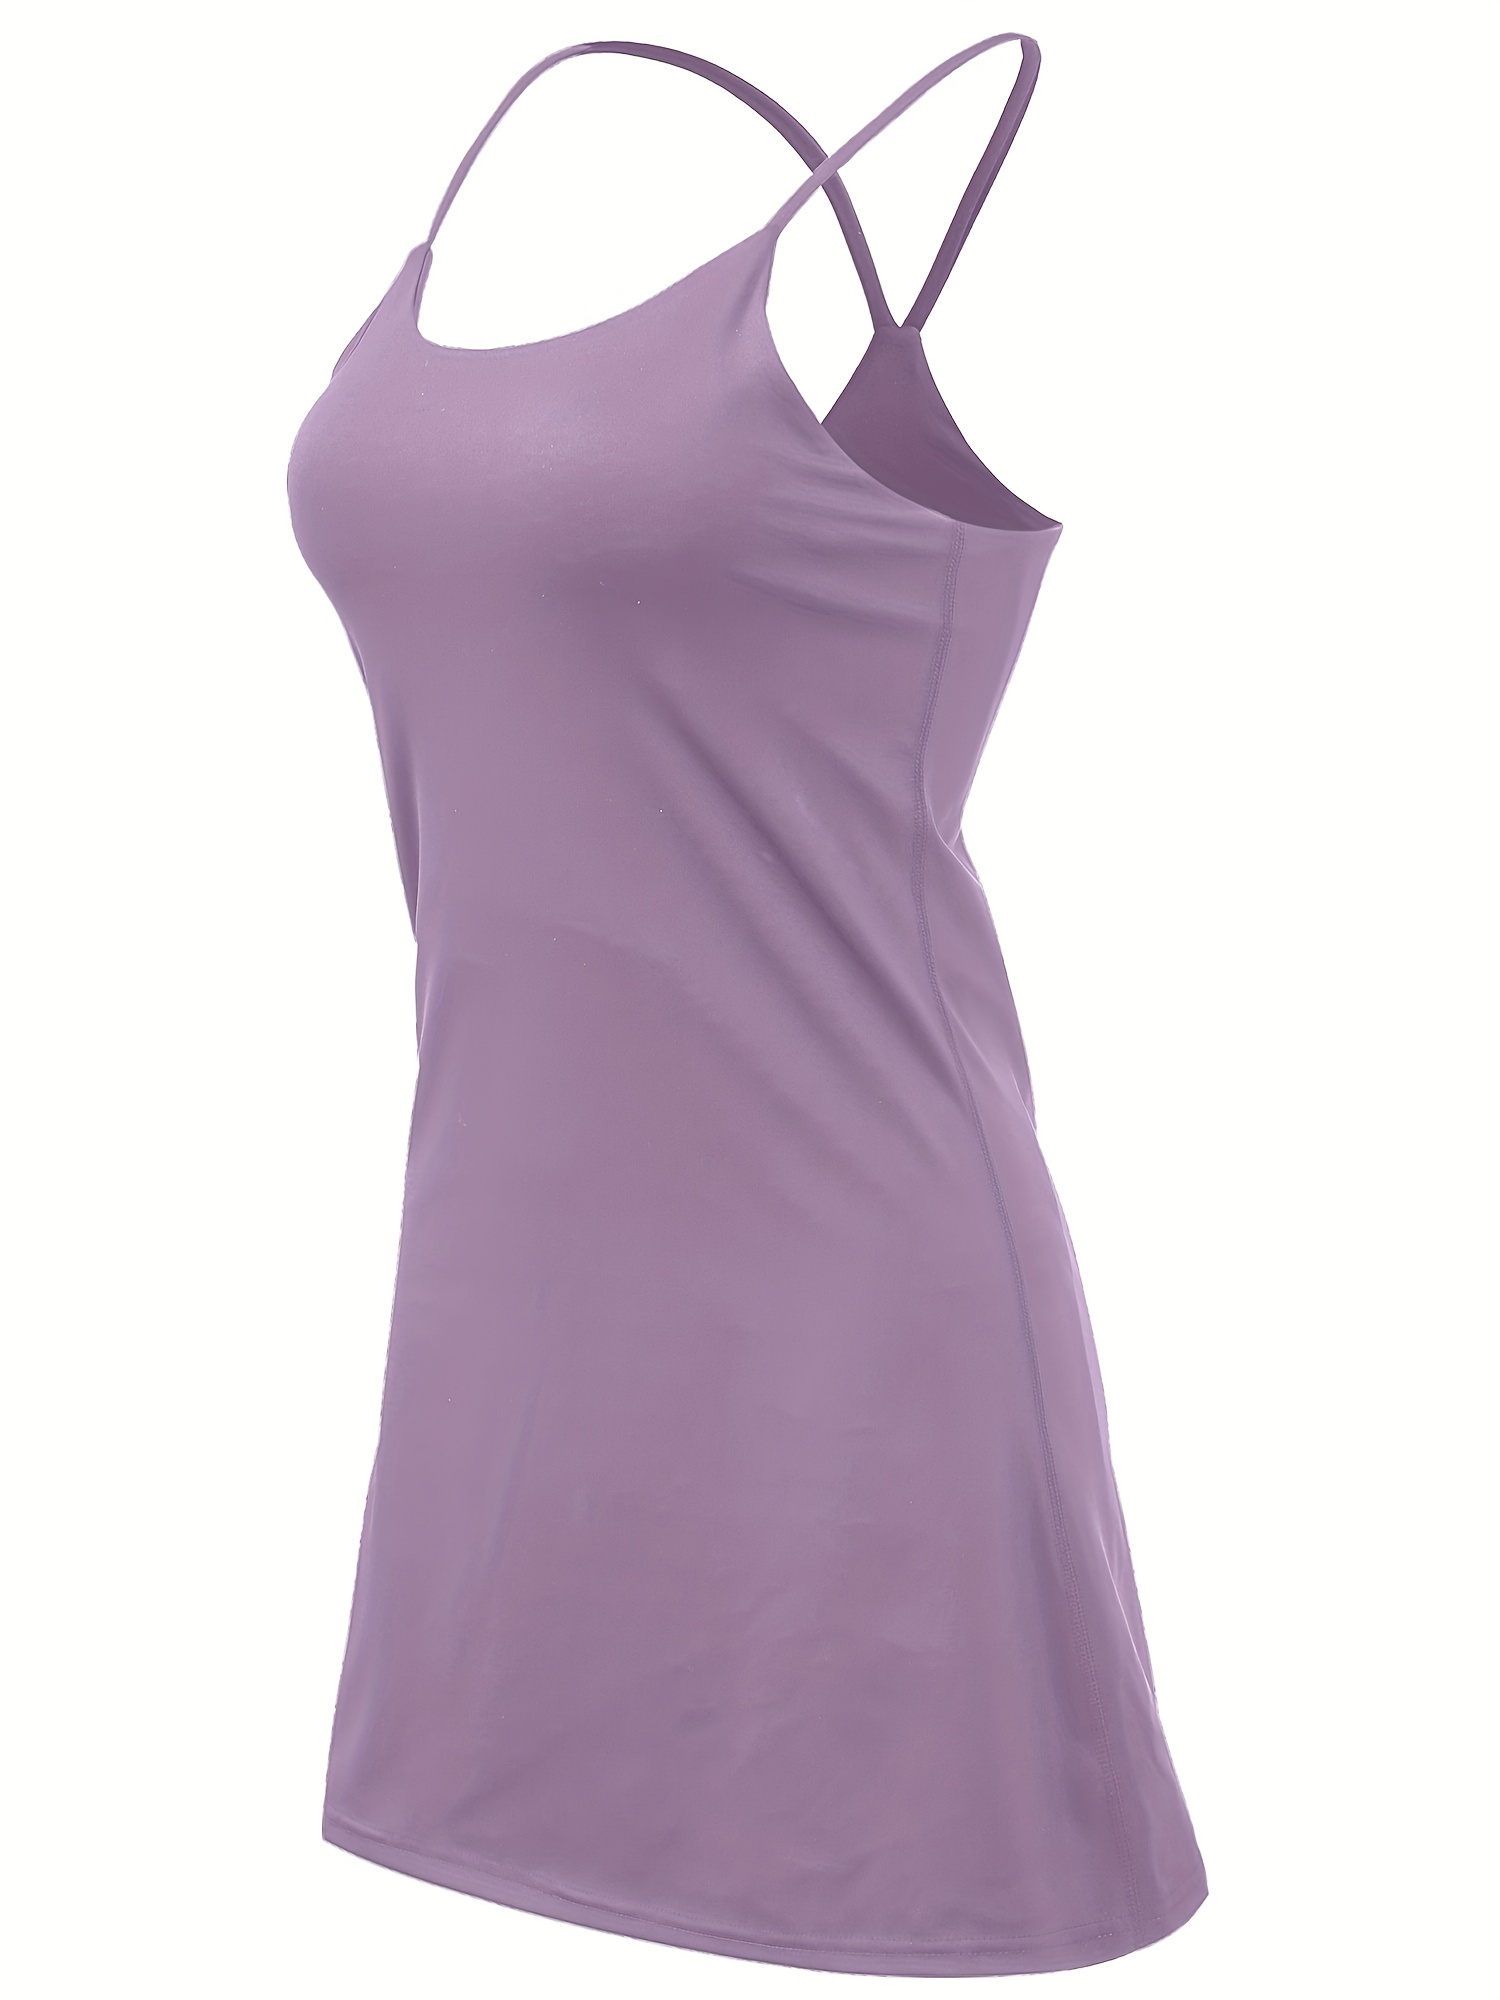 workout golf dress built-in with bra